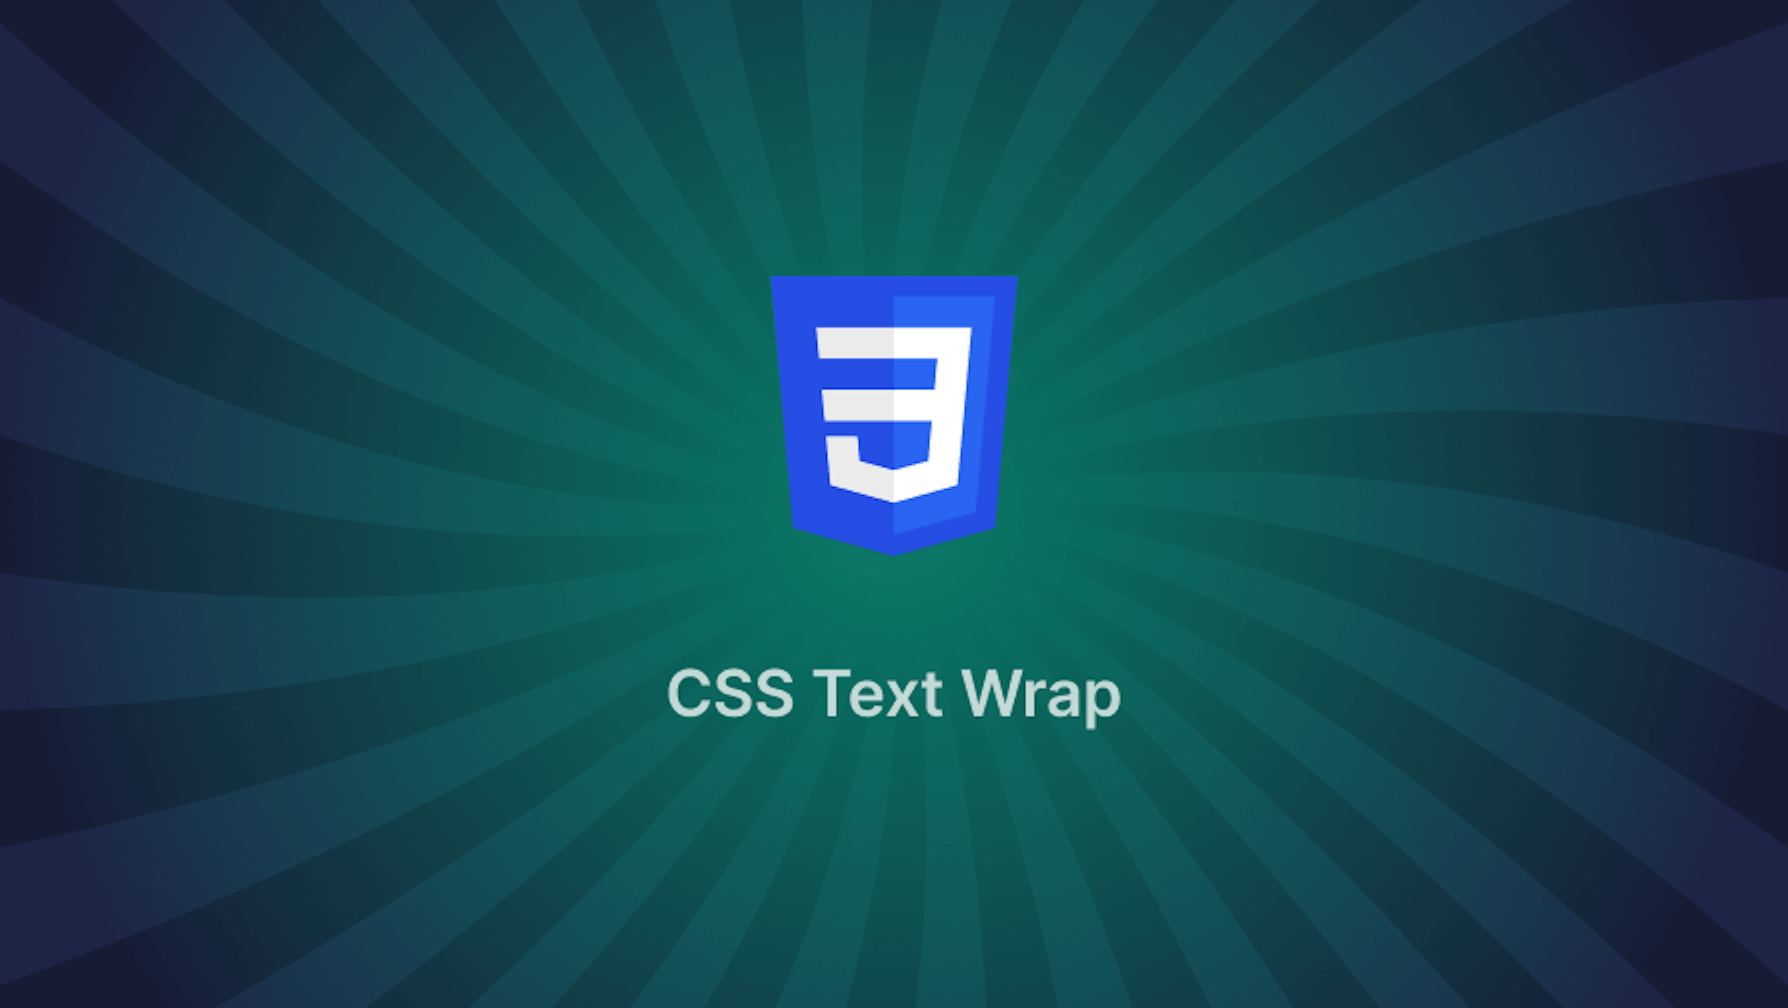 How do you wrap text content in CSS?